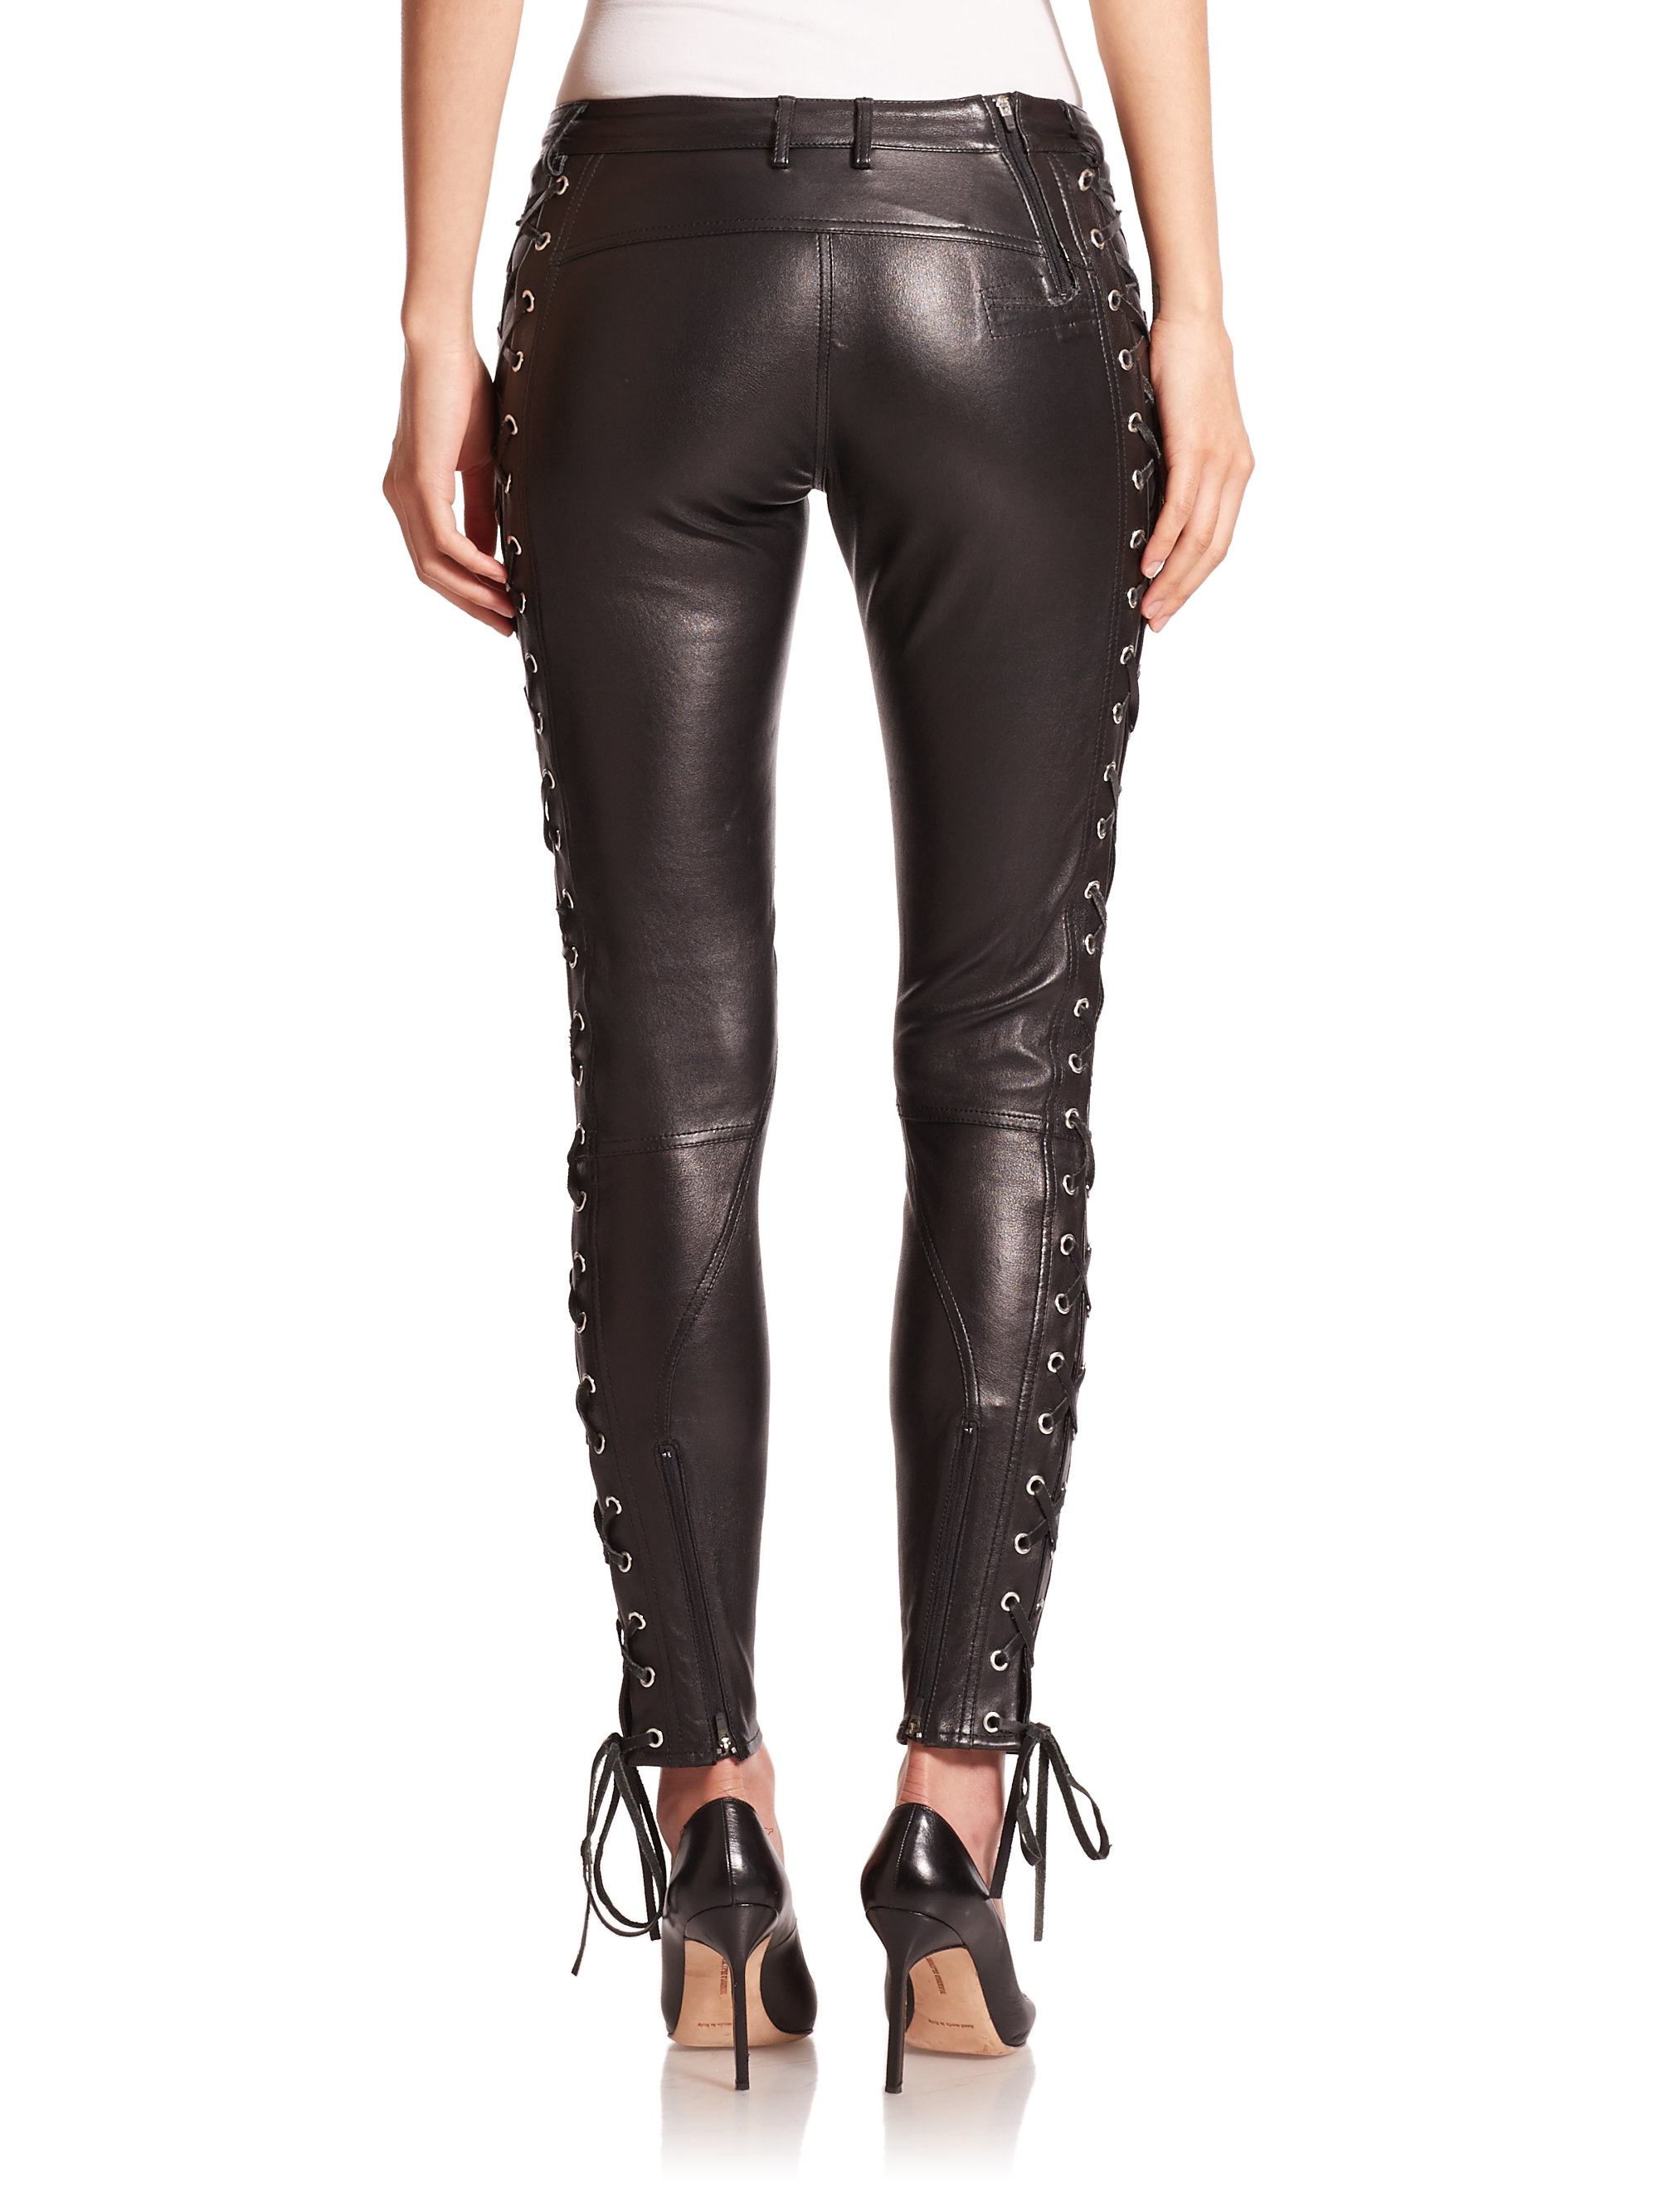 Faith connexion Leather Lace-up Leggings in Black | Lyst